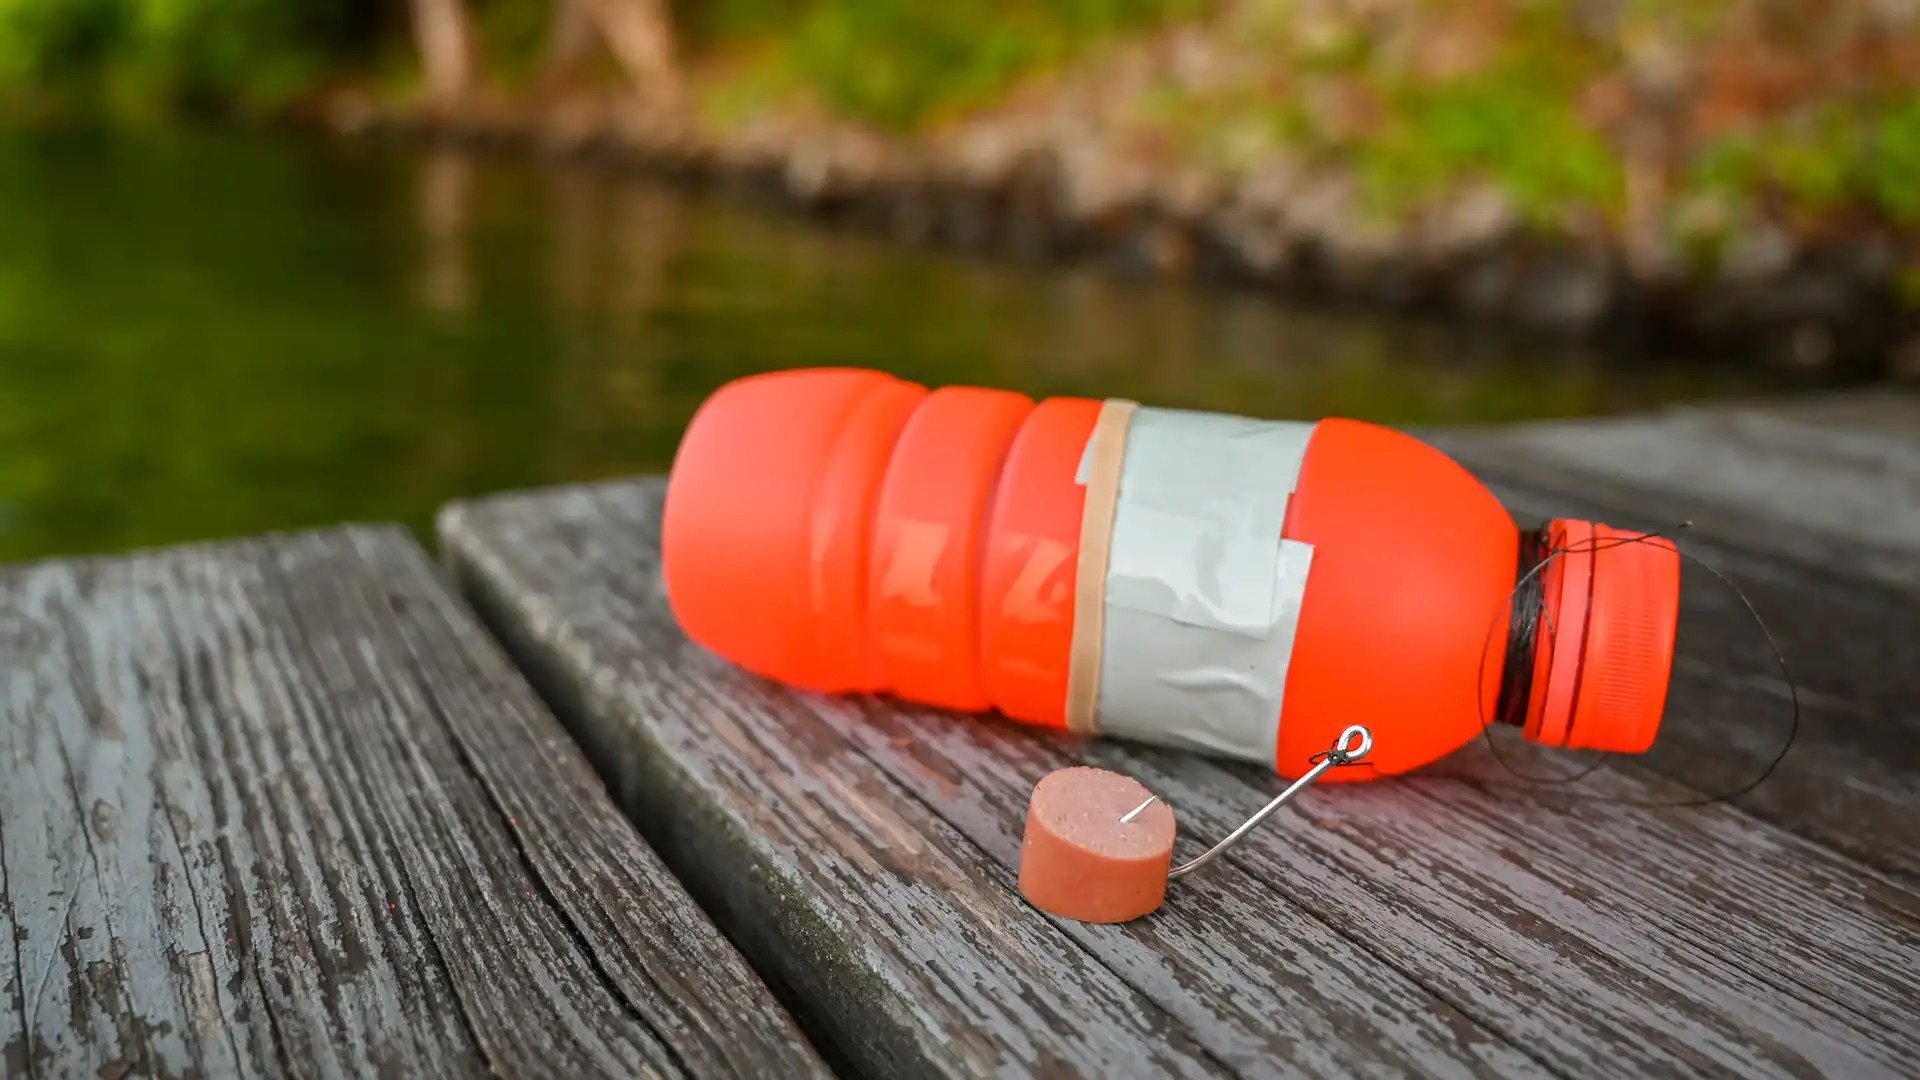 DIY Fish Trap: Catch More Fish with a Plastic Bottle